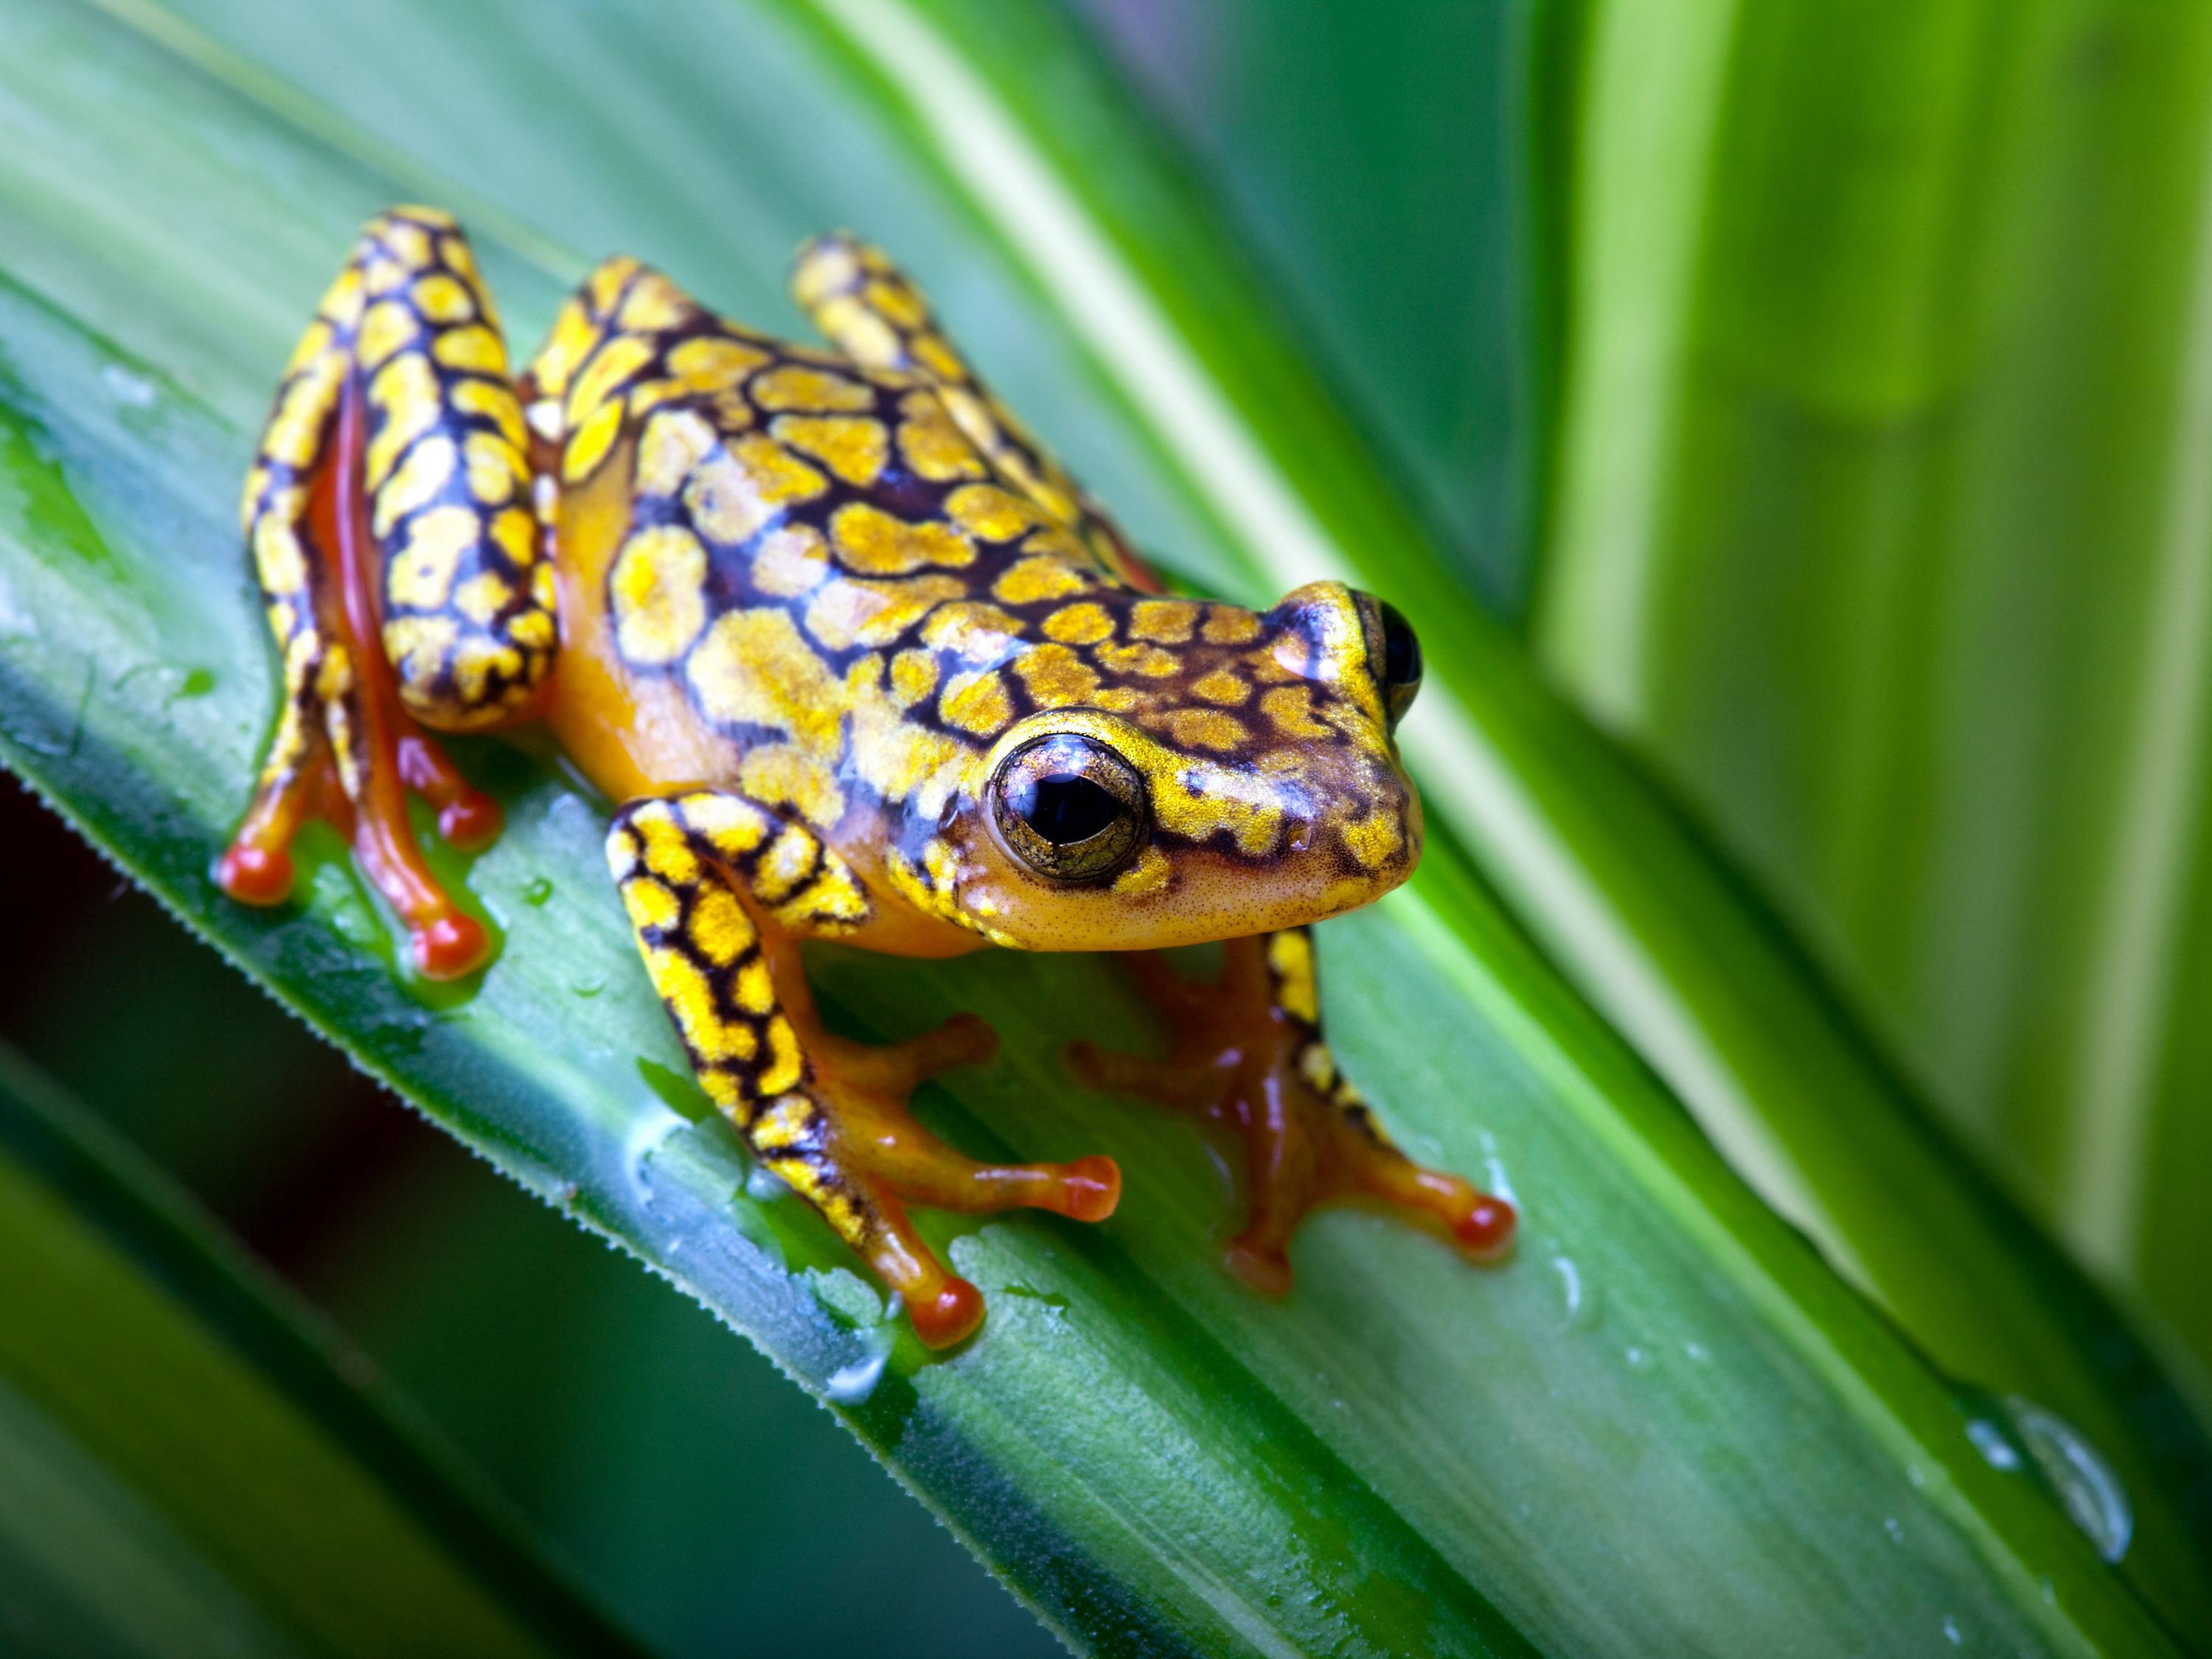 Download Frog Wallpaper 11921 3000x2250 px High Resolution